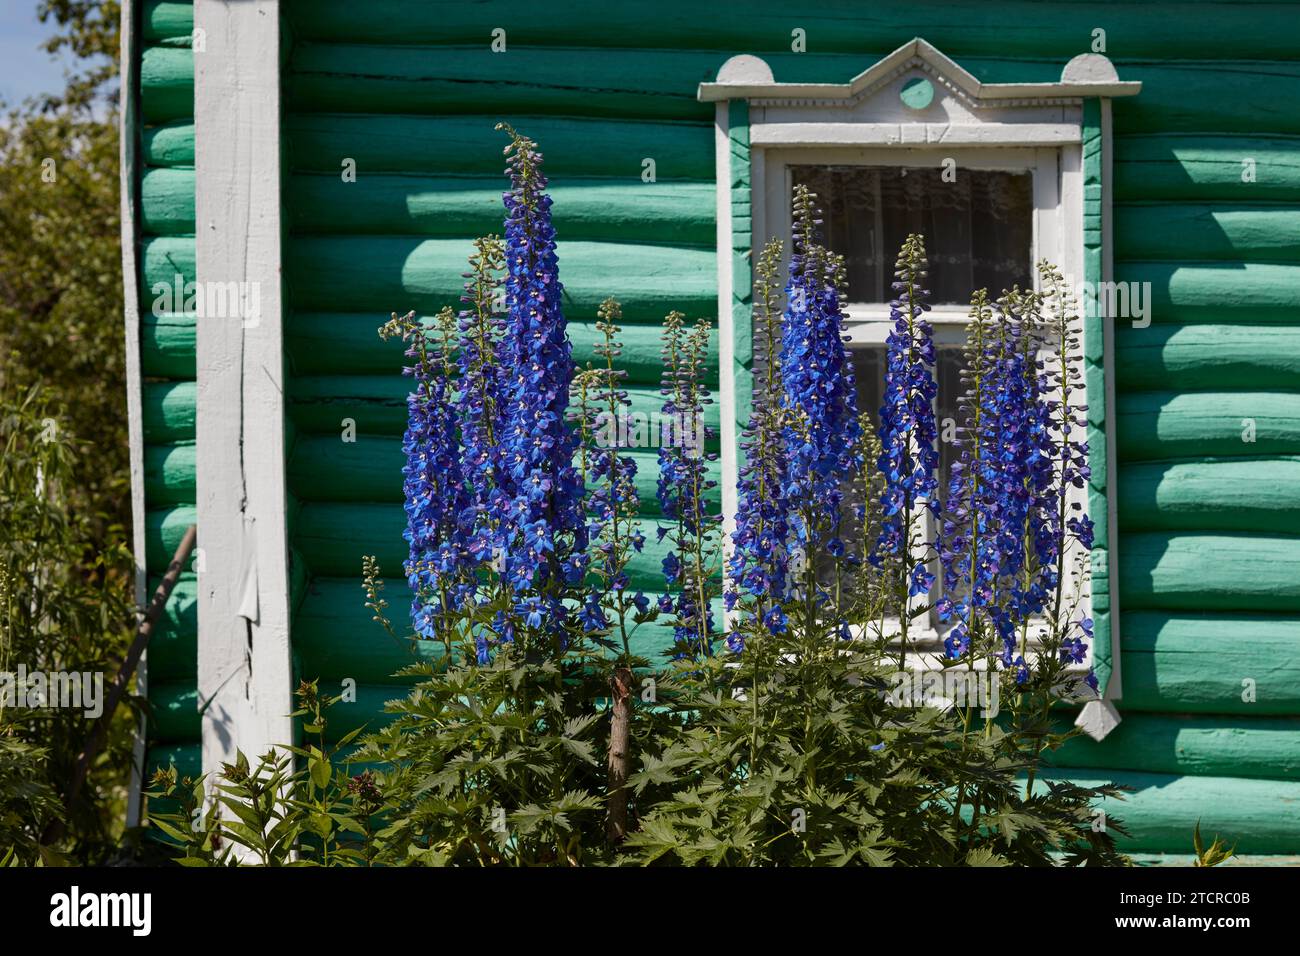 Delphiniums grow in front of a window in old log house. Kaluga Oblast, Russia. Stock Photo